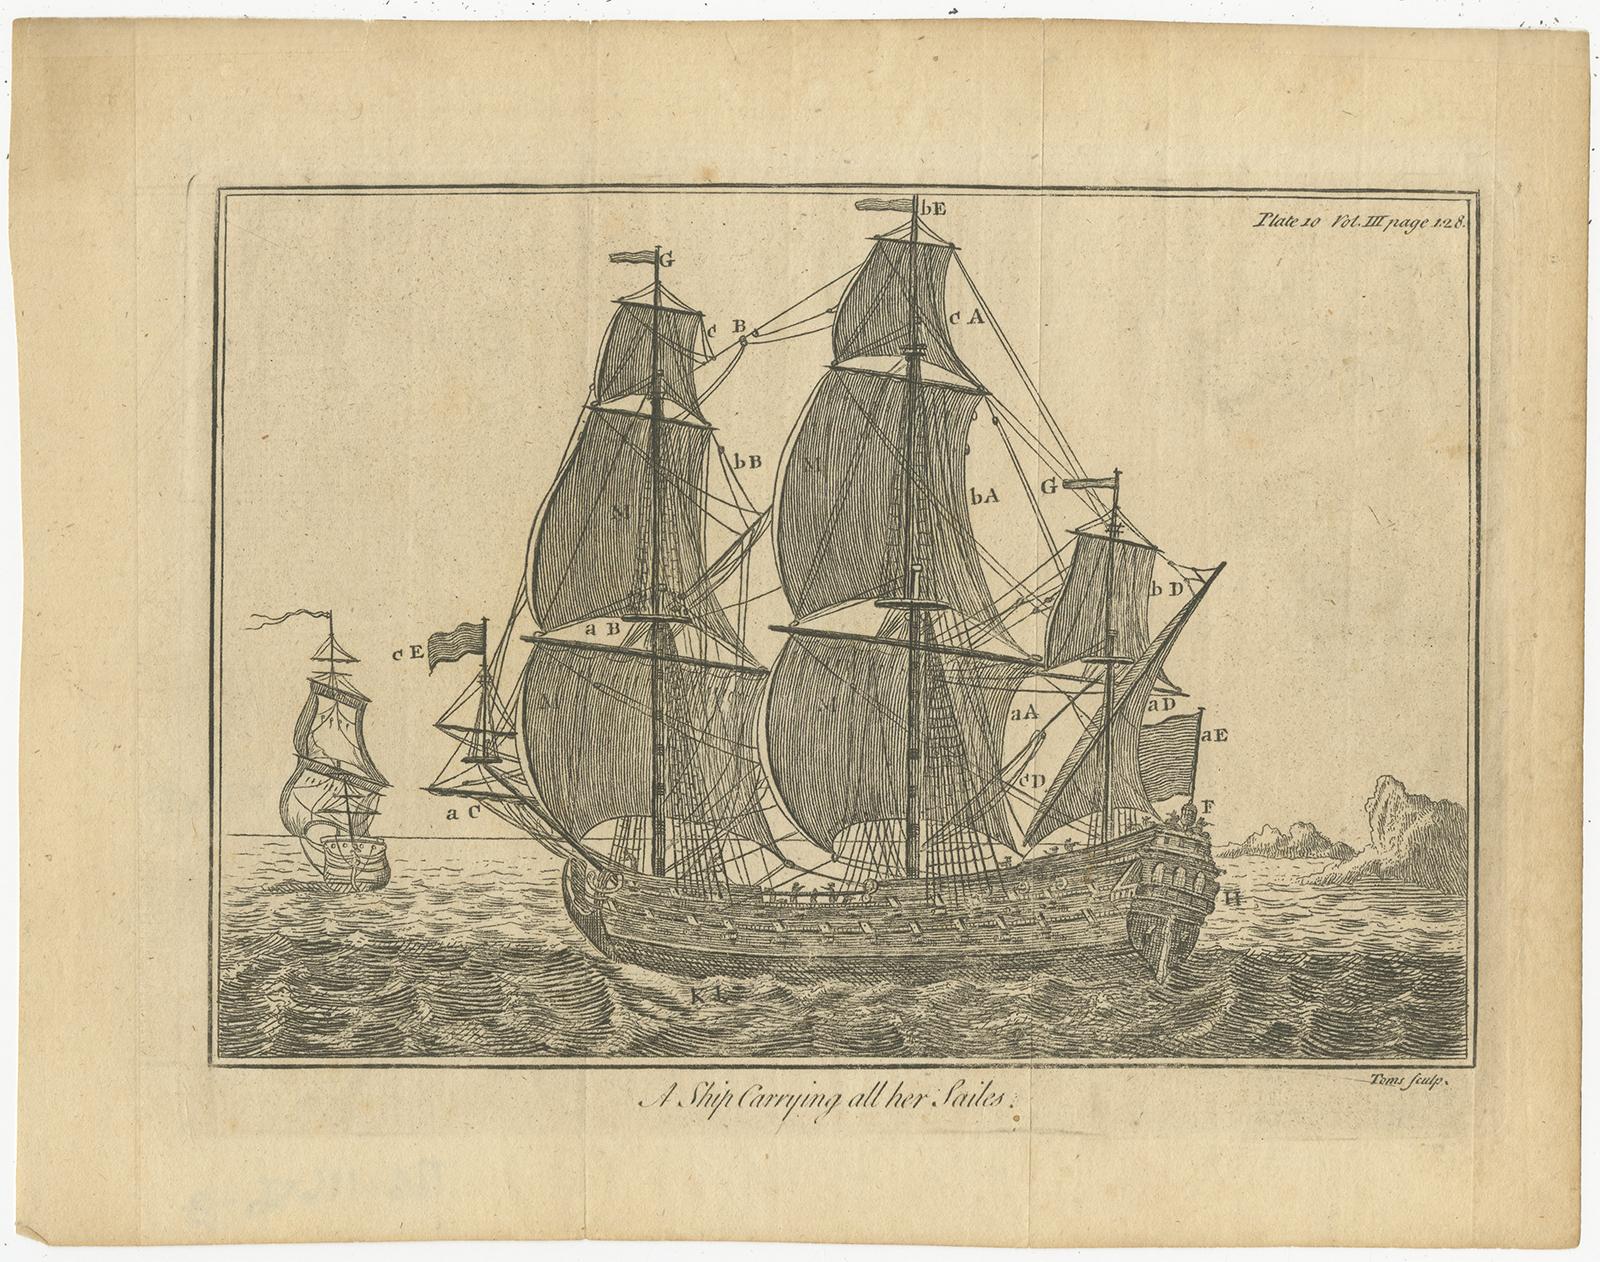 Set of two antique prints titled 'A Ship carrying all her Sailes' and 'A little Vessel'. These prints originates from volume 3 of 'Spectacle de la Nature: Or, Nature Display'd' by Noe?¨l Antoine Pluche. Published, 1750.